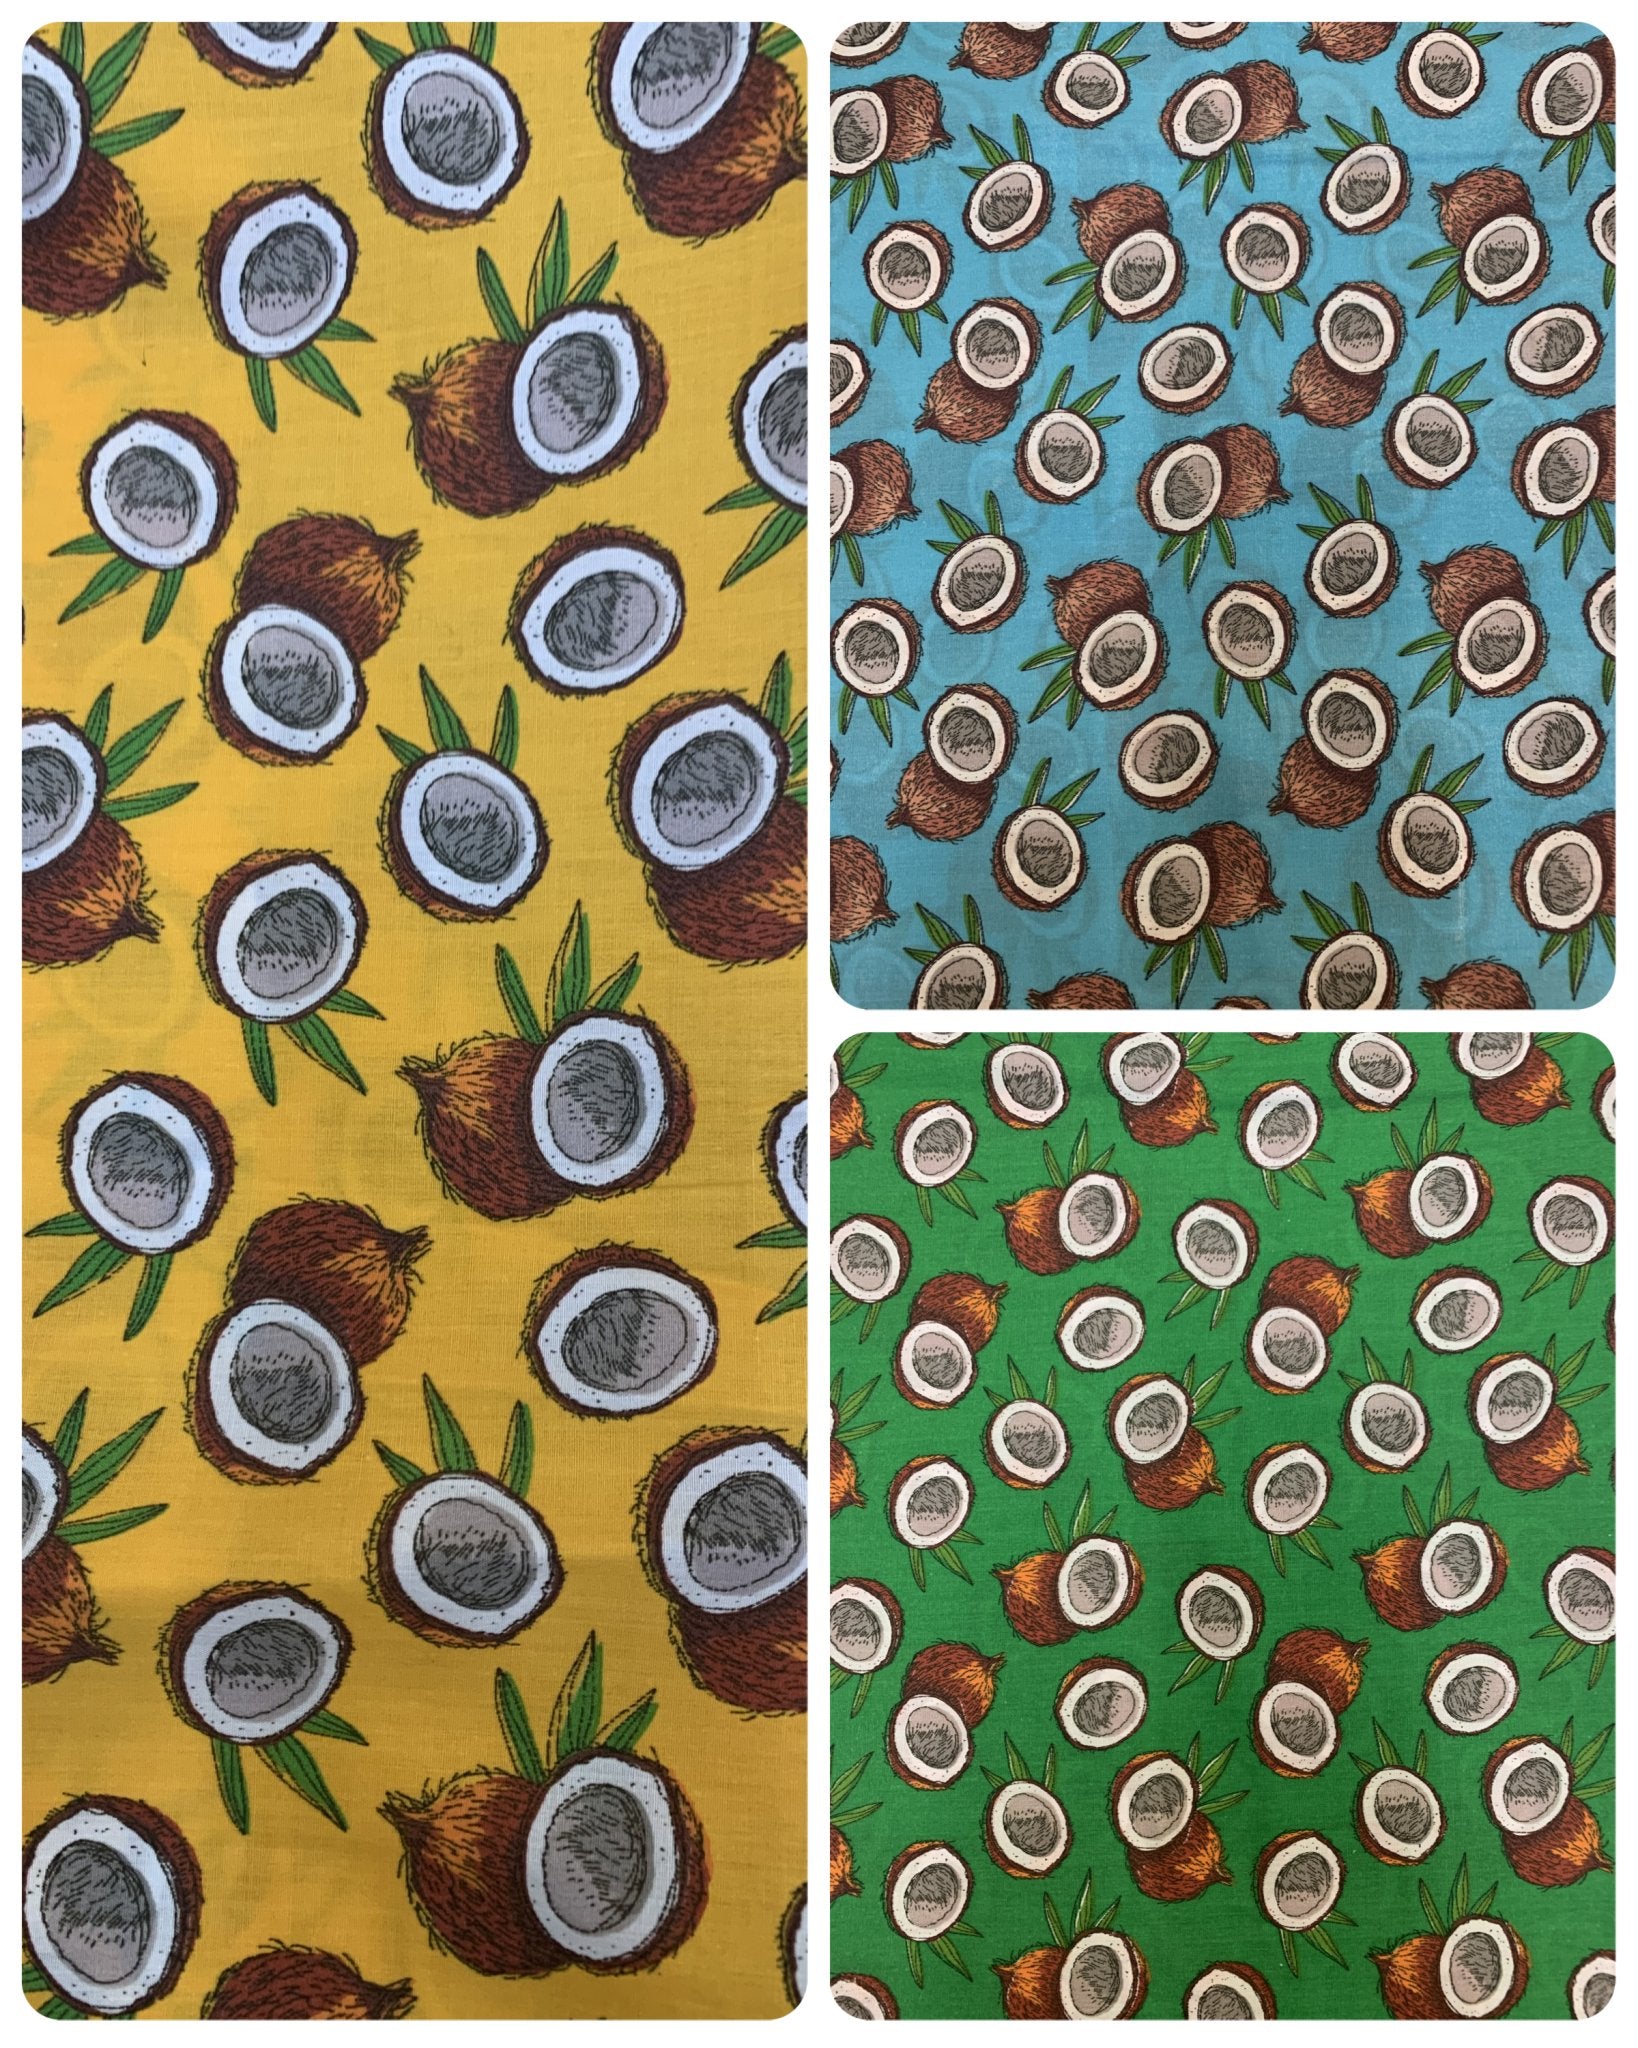 Fashion Coconut Print Poly Cotton Fabric By The Yard (Yellow, Blue)Cotton FabricICEFABRICICE FABRICSGreenFashion Coconut Print Poly Cotton Fabric By The Yard (Yellow, Blue) ICEFABRIC